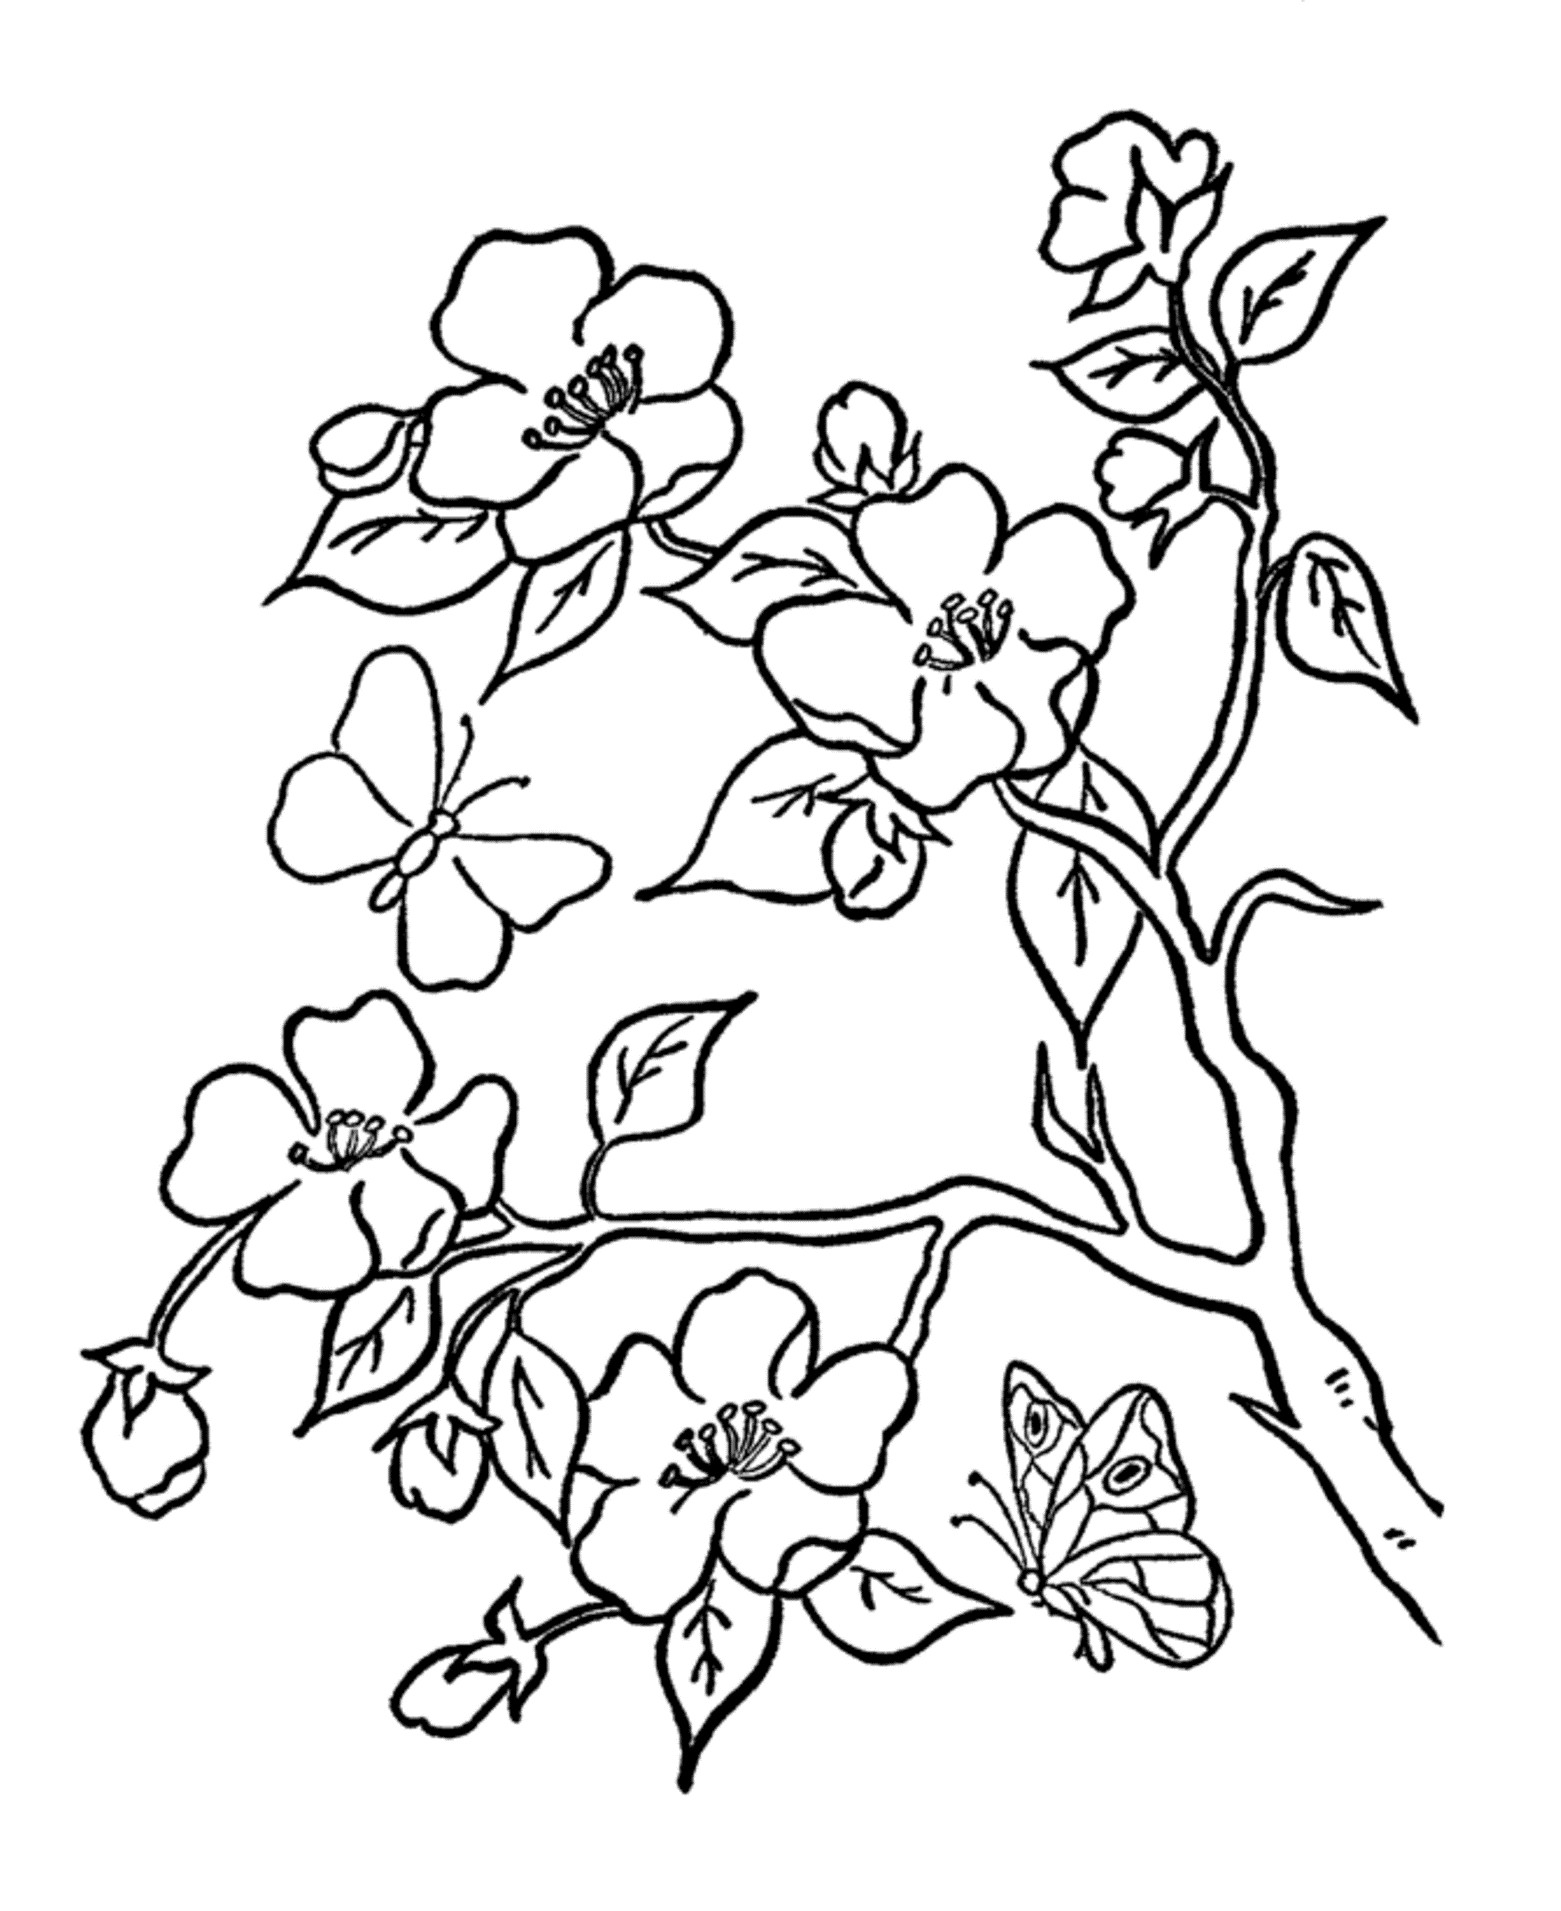 Free Flower Coloring Pages For Kids
 Цветя за оцветяване – mama dnes